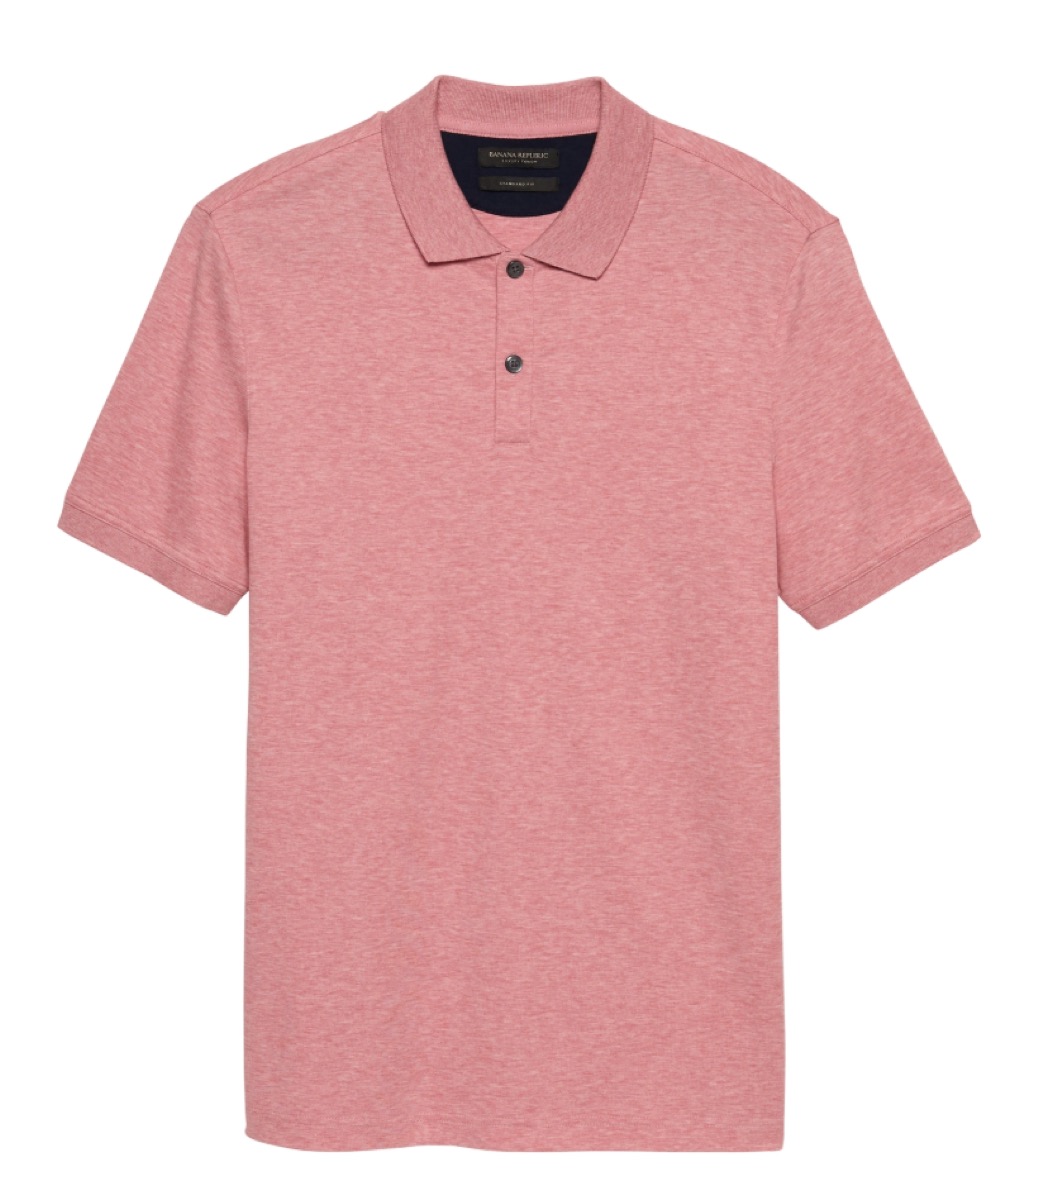 banana republic luxury touch polo in grapefruit pink